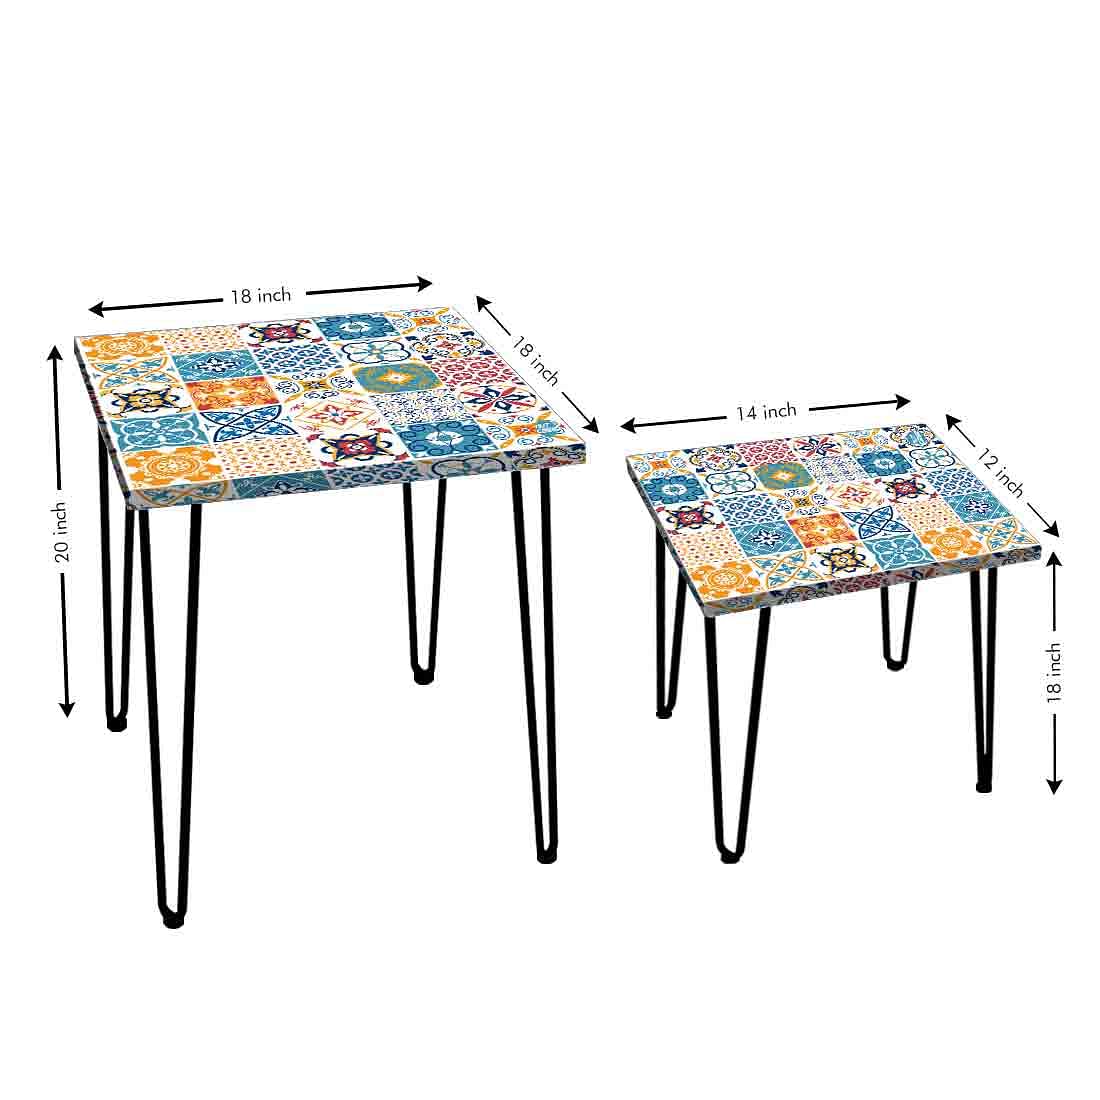 Nesting Table Set of 2 for Living Room Outdoors Patio - Azulejos Portuguese Nutcase